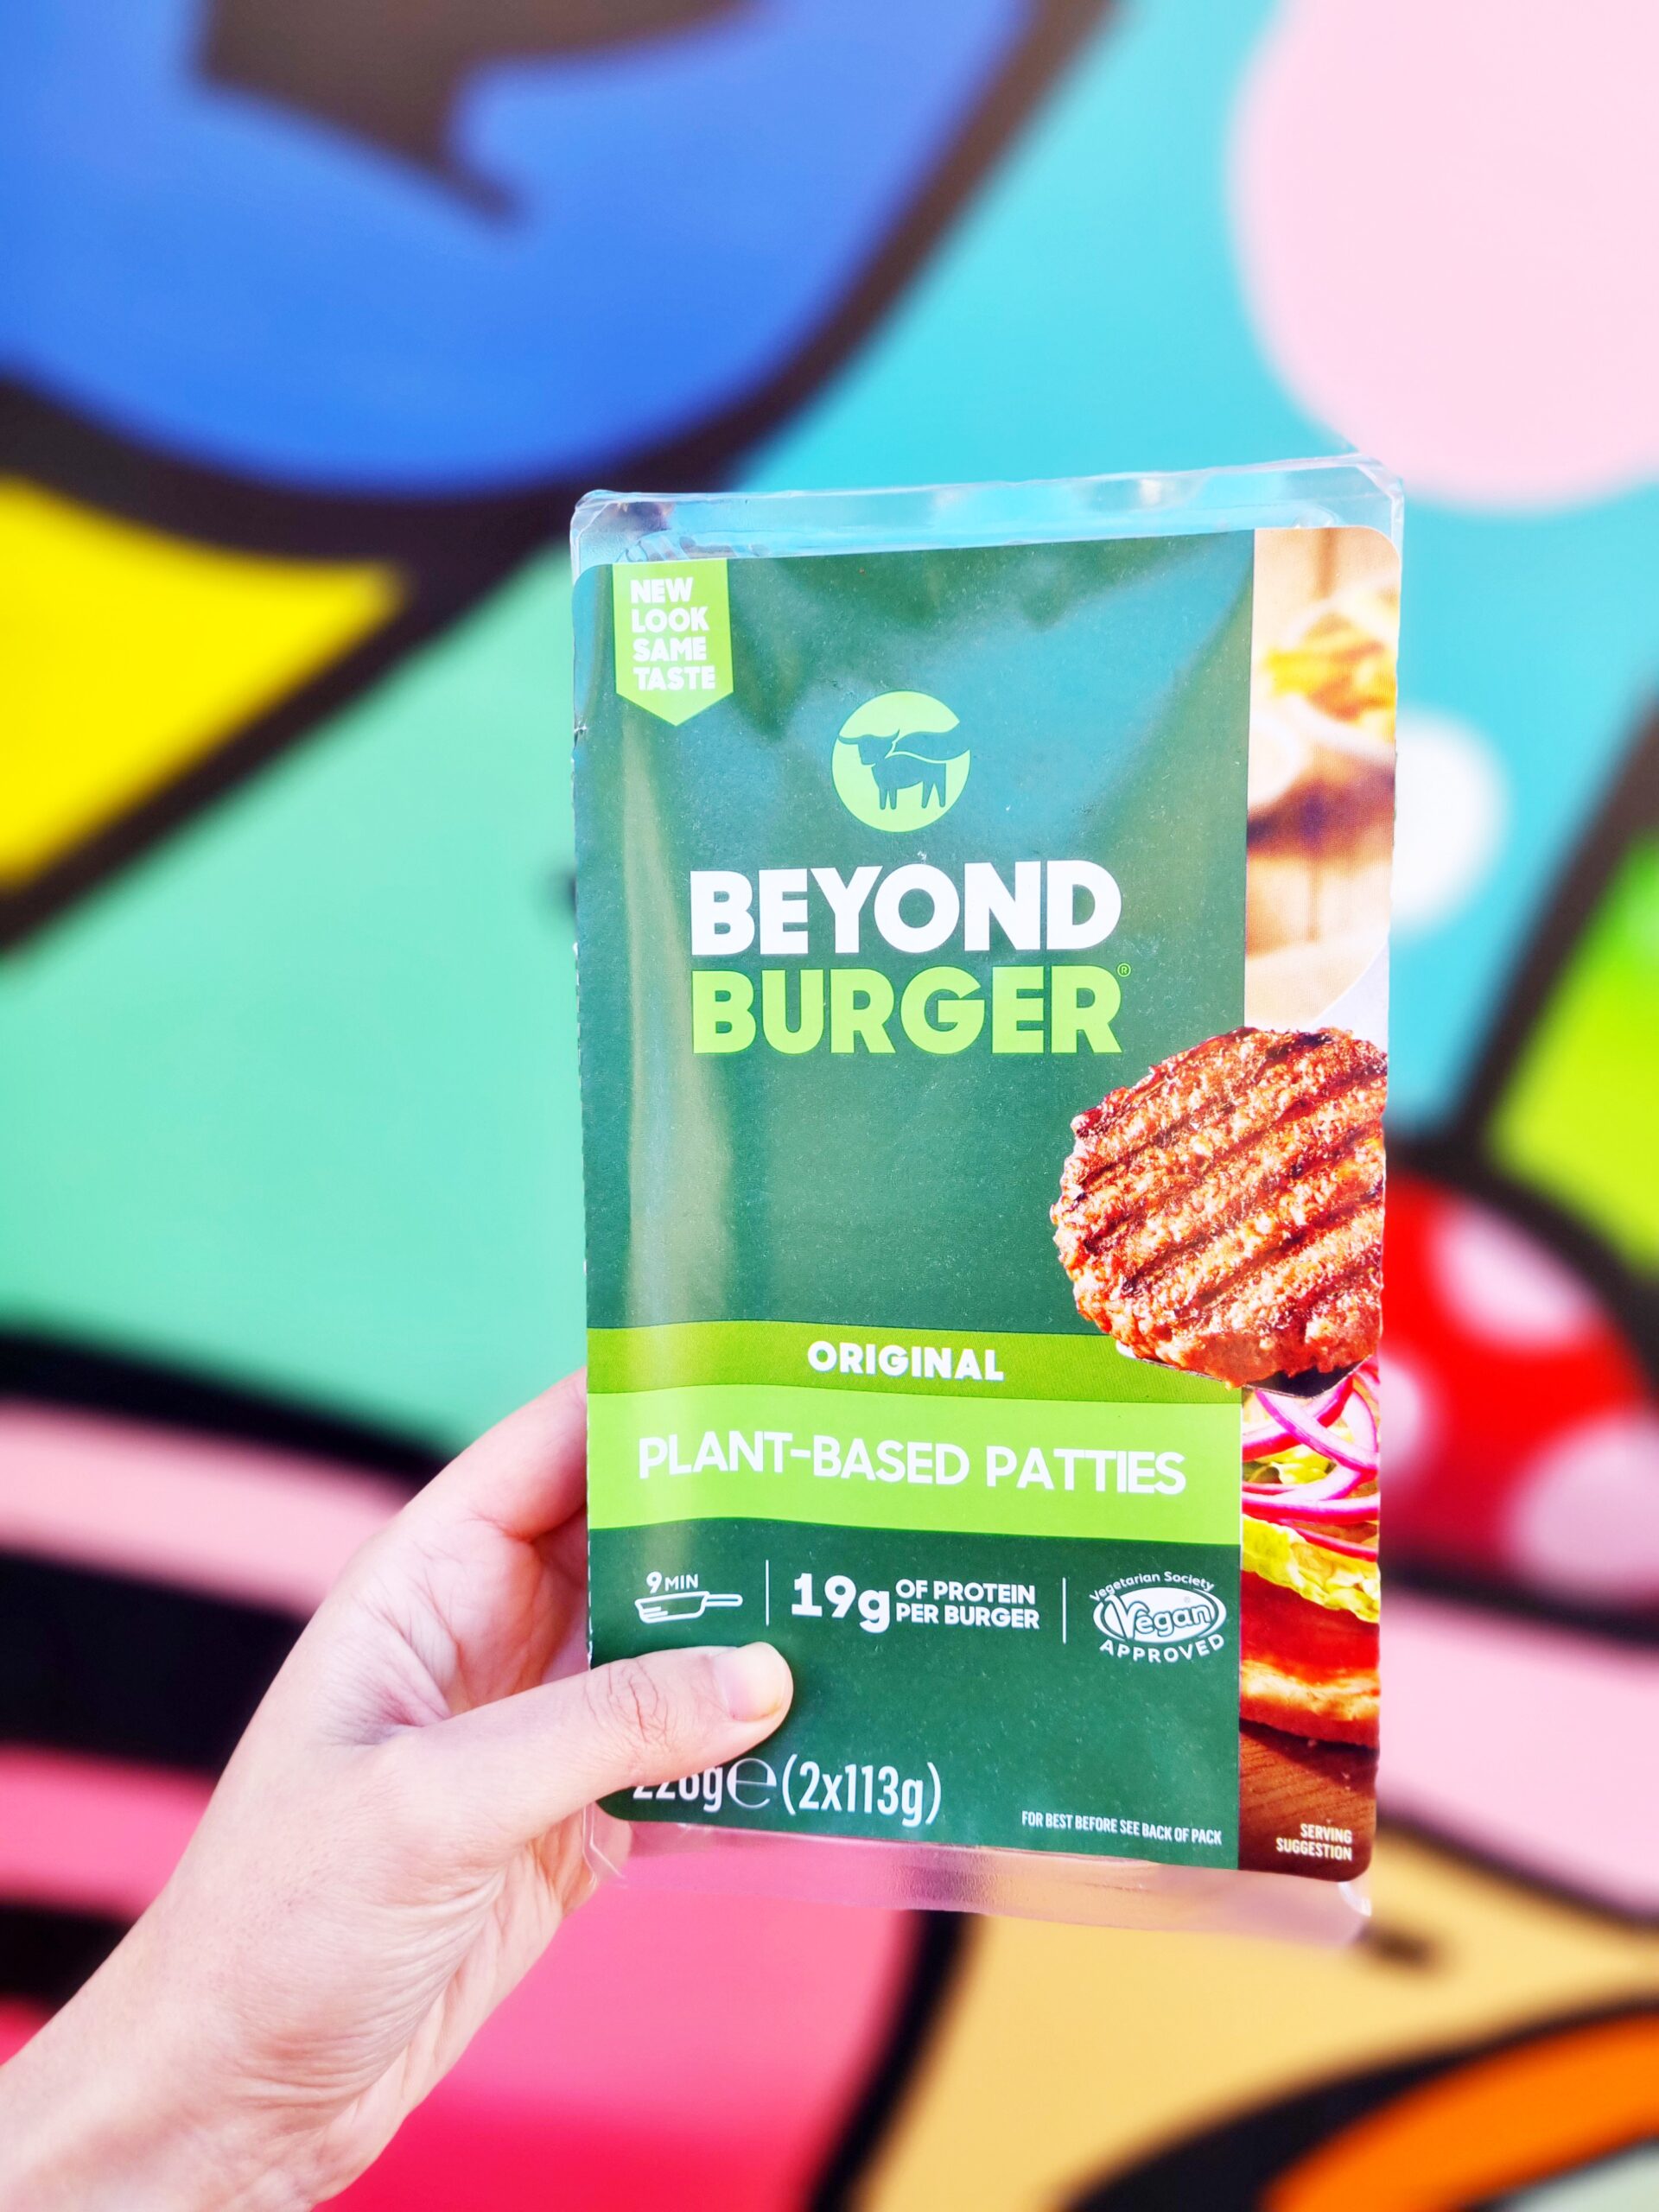 <img src="Beyond Meat.jpg" alt="Beyond Meat colourful vegan products"/>